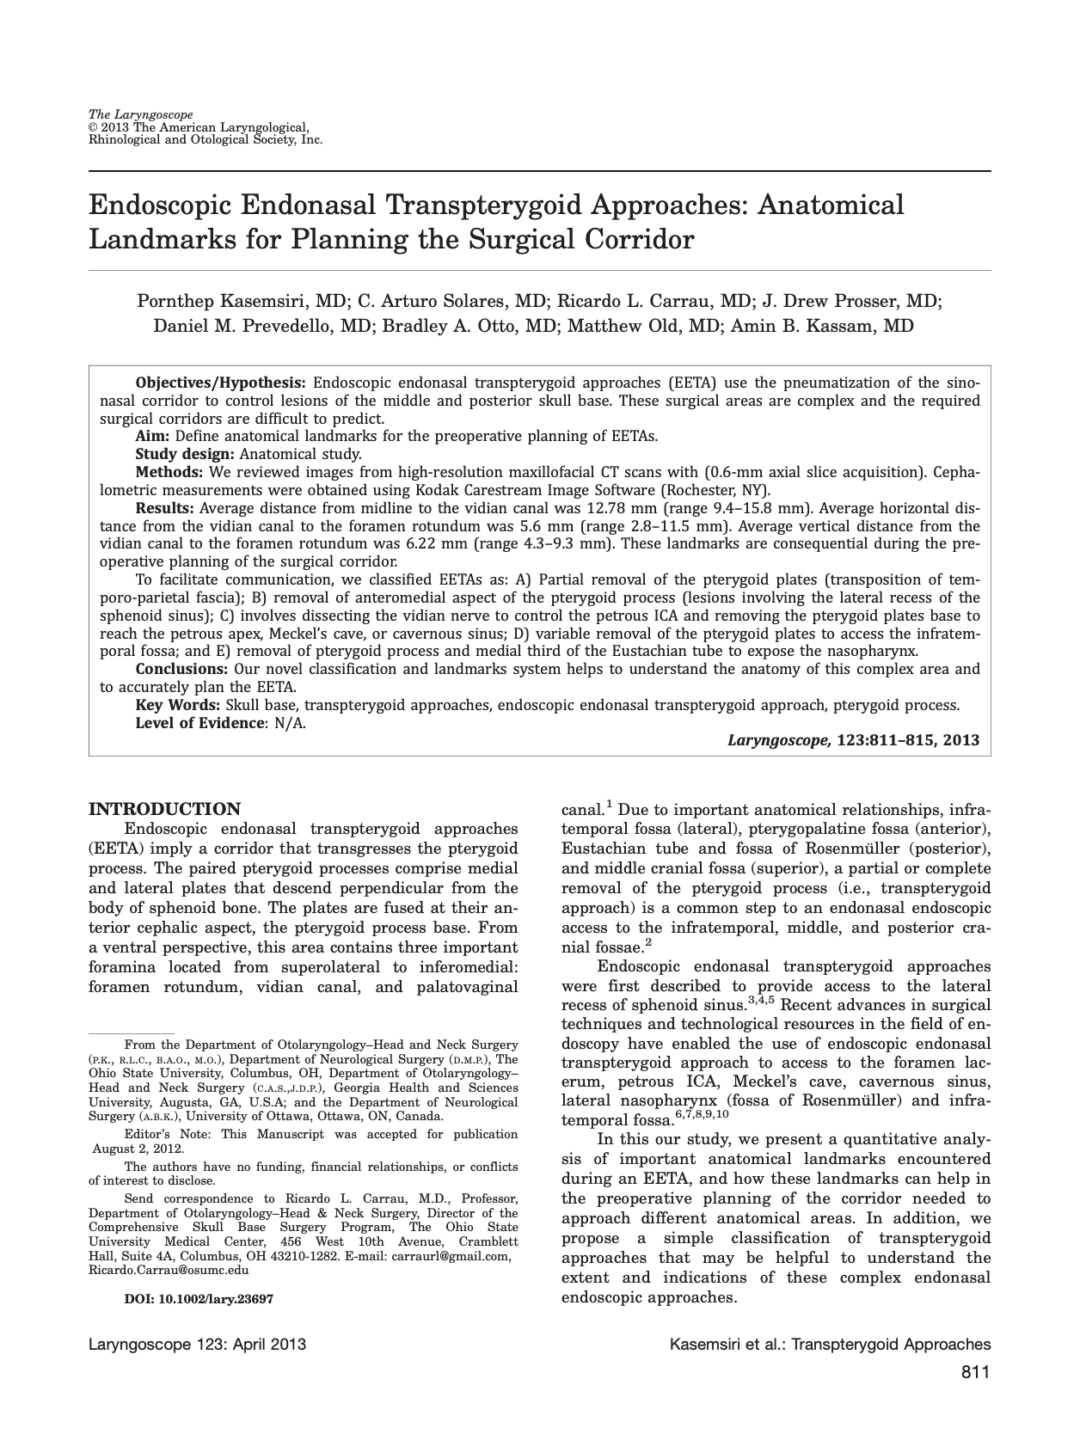 Endoscopic Endonasal Transpterygoid Approaches: Anatomical Landmarks for Planning the Surgical Corridor